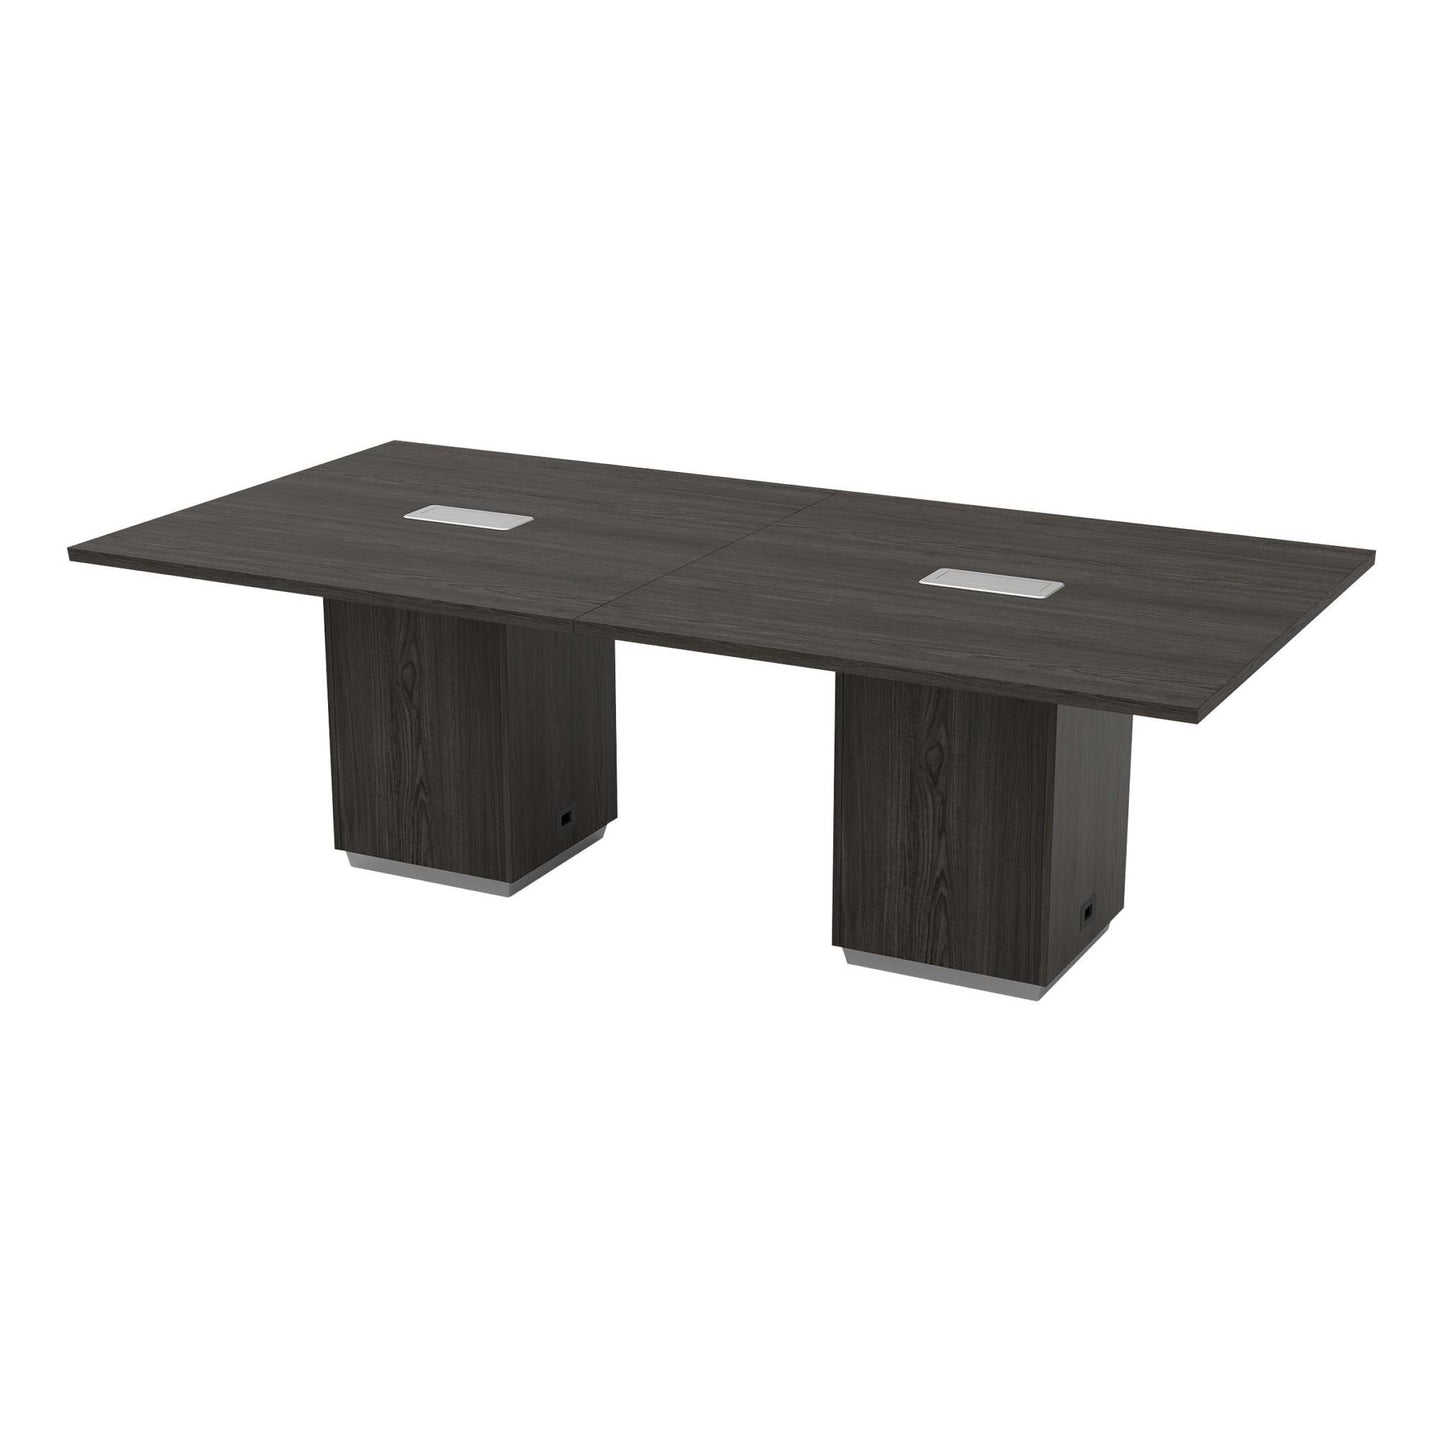 New Tuxedo Series 8′ Rectangular Conference Table by Office Star